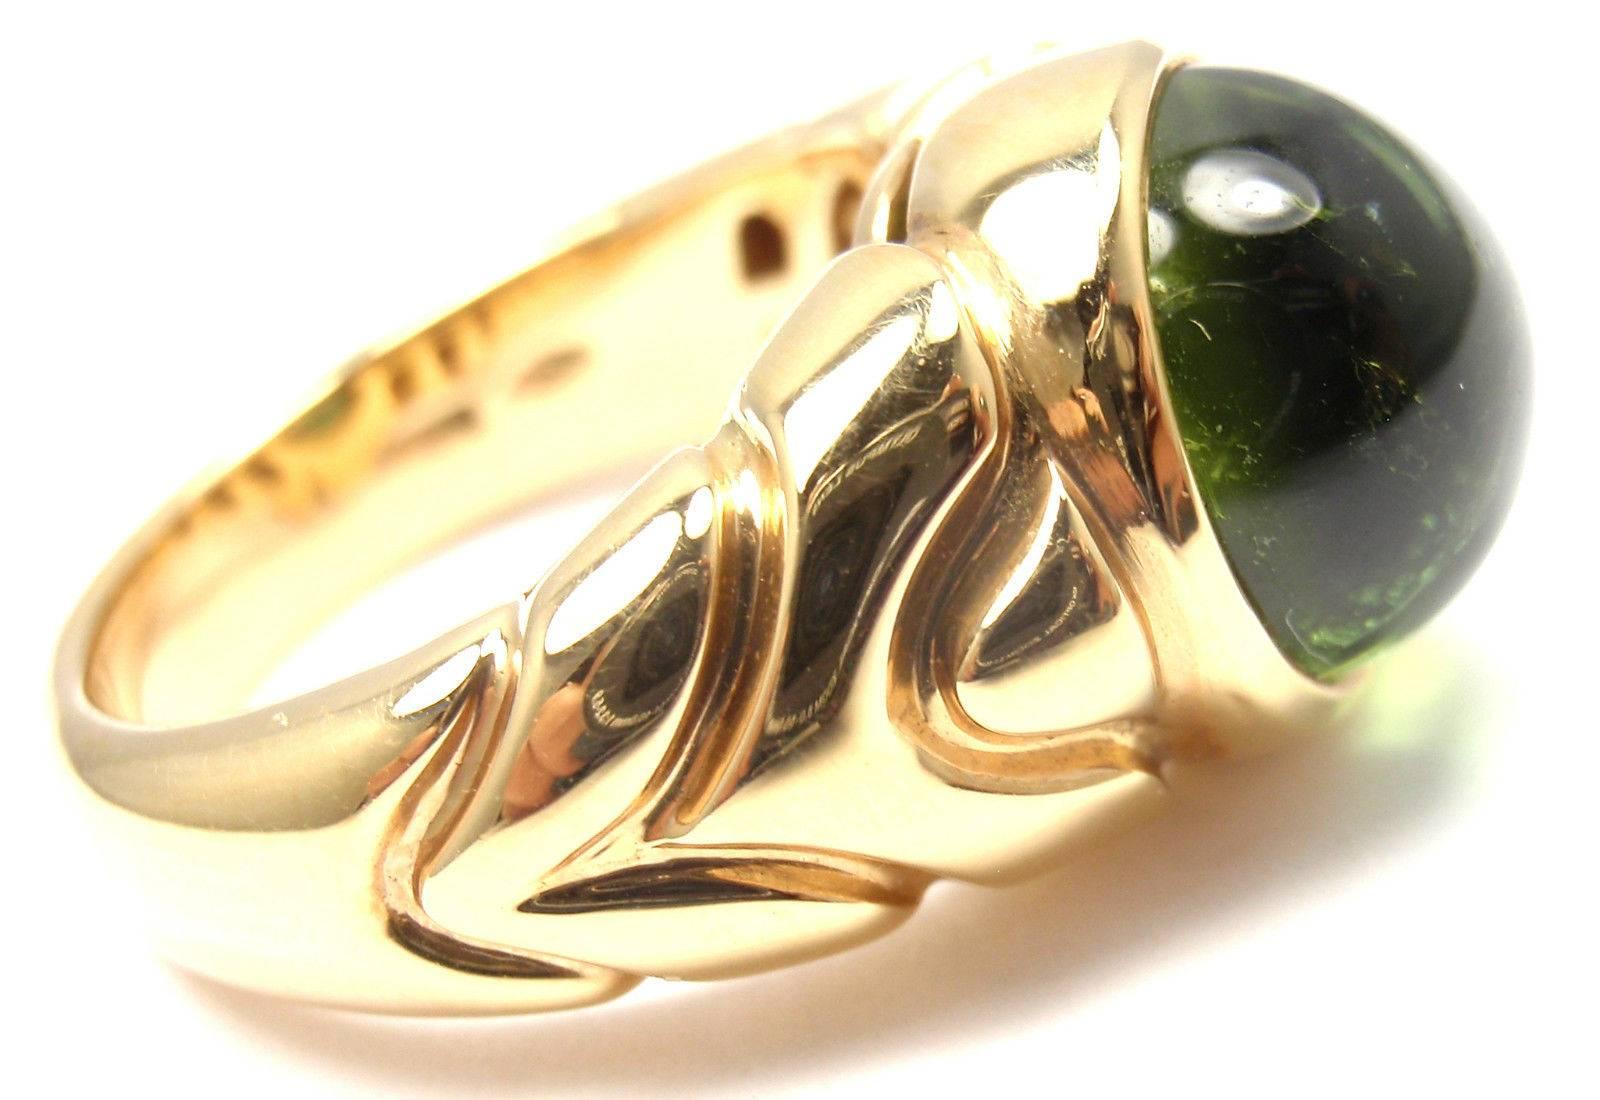 18k Yellow Gold Gold Green Tourmaline Ring by Bulgari. 
With 1 round green tourmaline 10mm

Details: 
Ring Size: 5.5 (resize available)
Width: 12mm
Weight: 11.2 grams
Stamped Hallmarks: Bvlgari, 750, 1970AL

*Free Shipping within the United